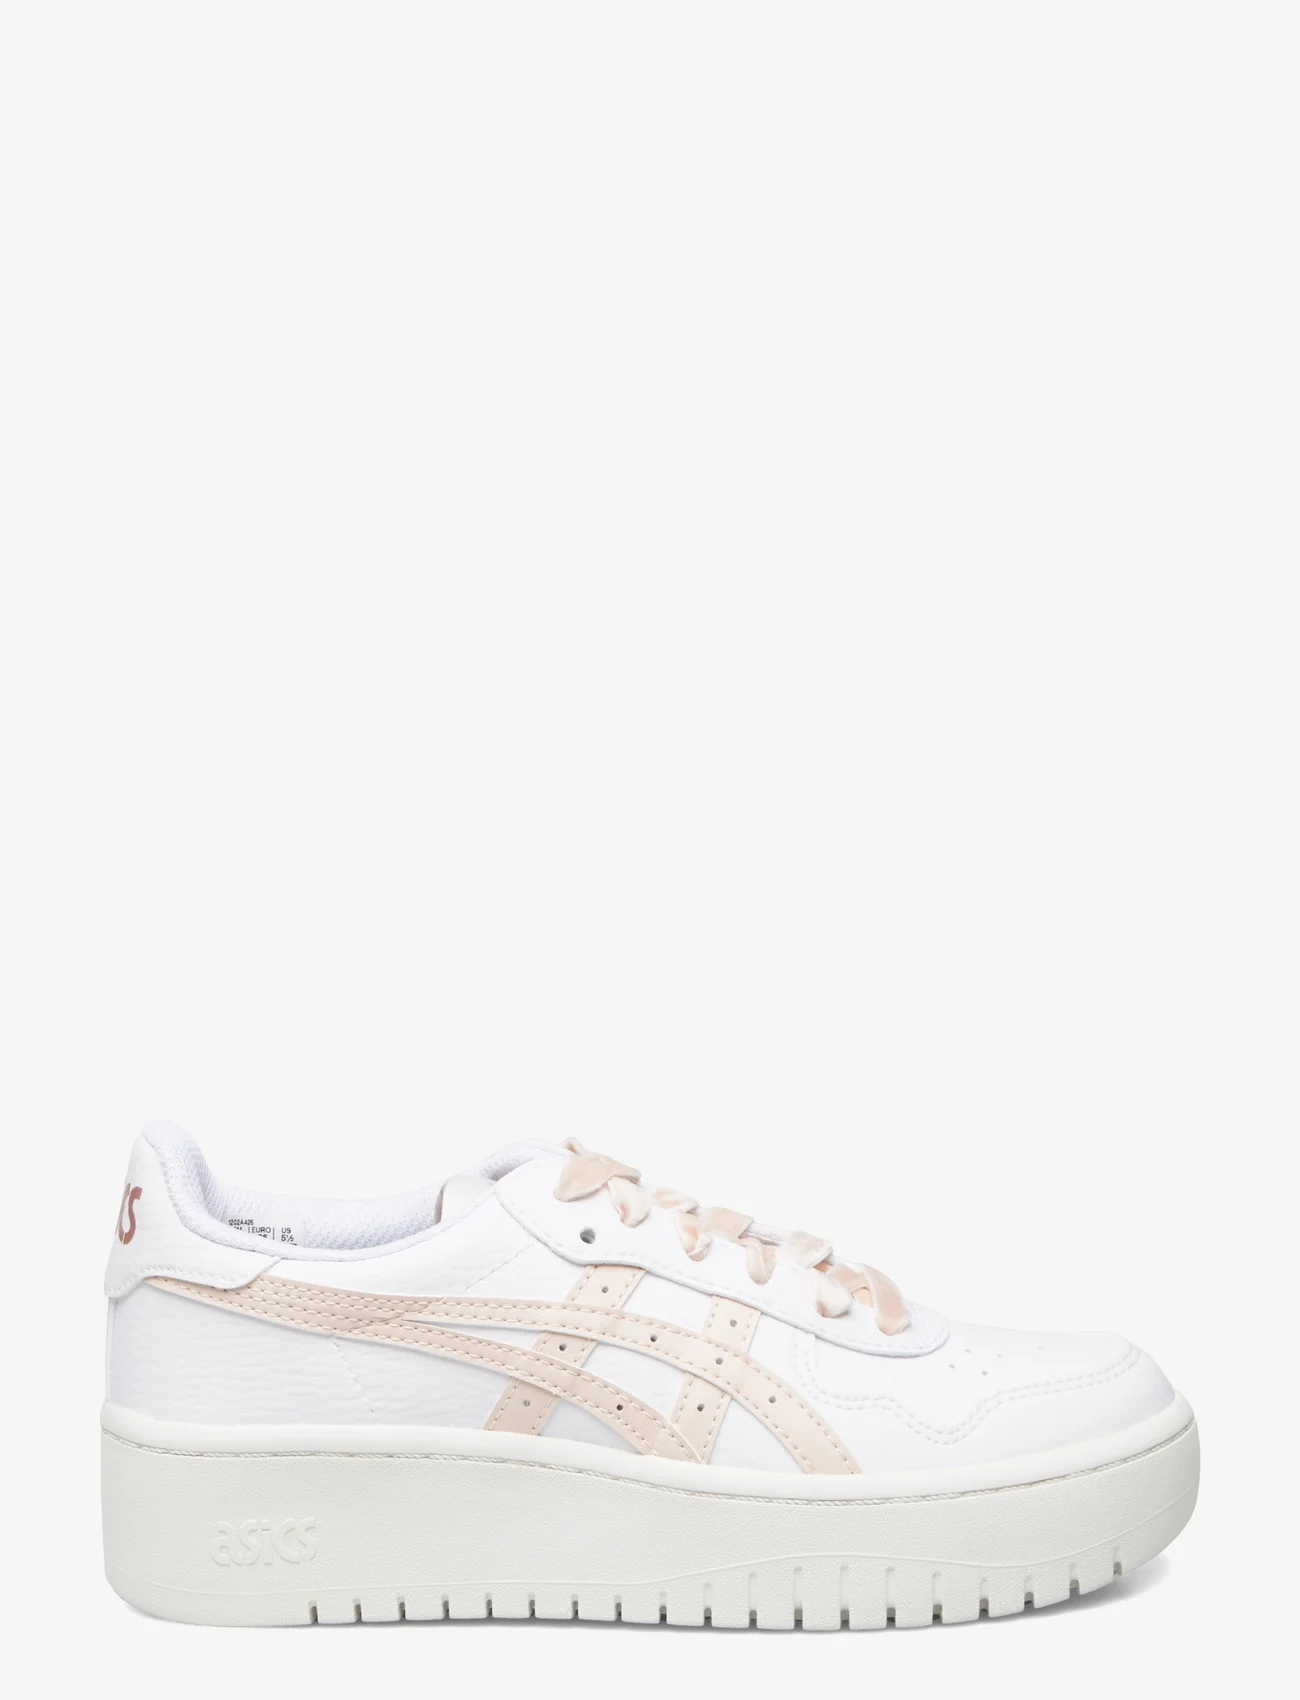 Asics - JAPAN S PF - low top sneakers - white/mineral beige - 1